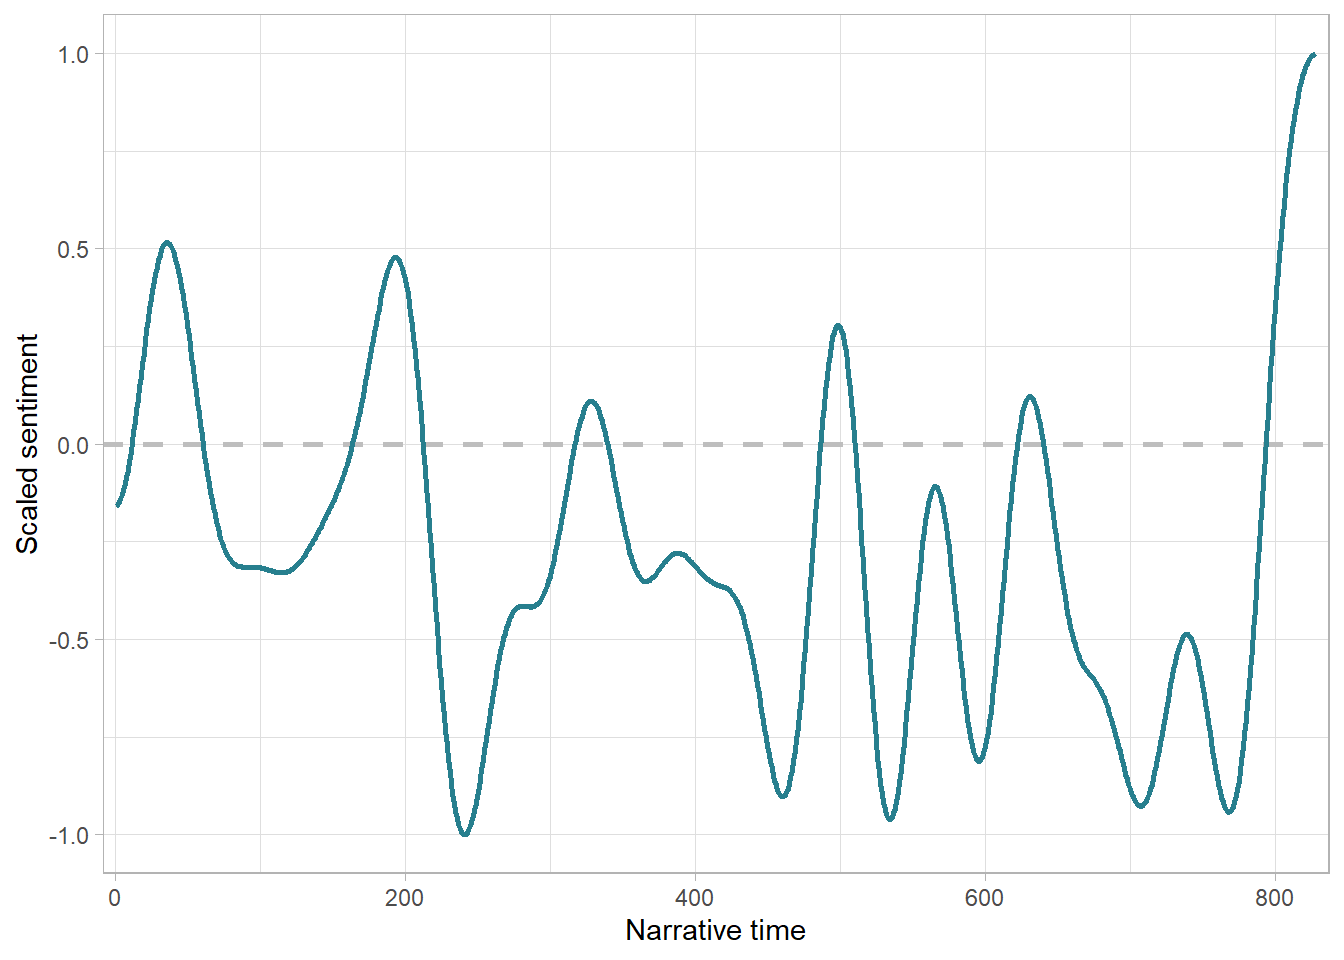 A ggplot2 style version of the output of the `sp()` function for sentiments in *Annabelle: Creation*.